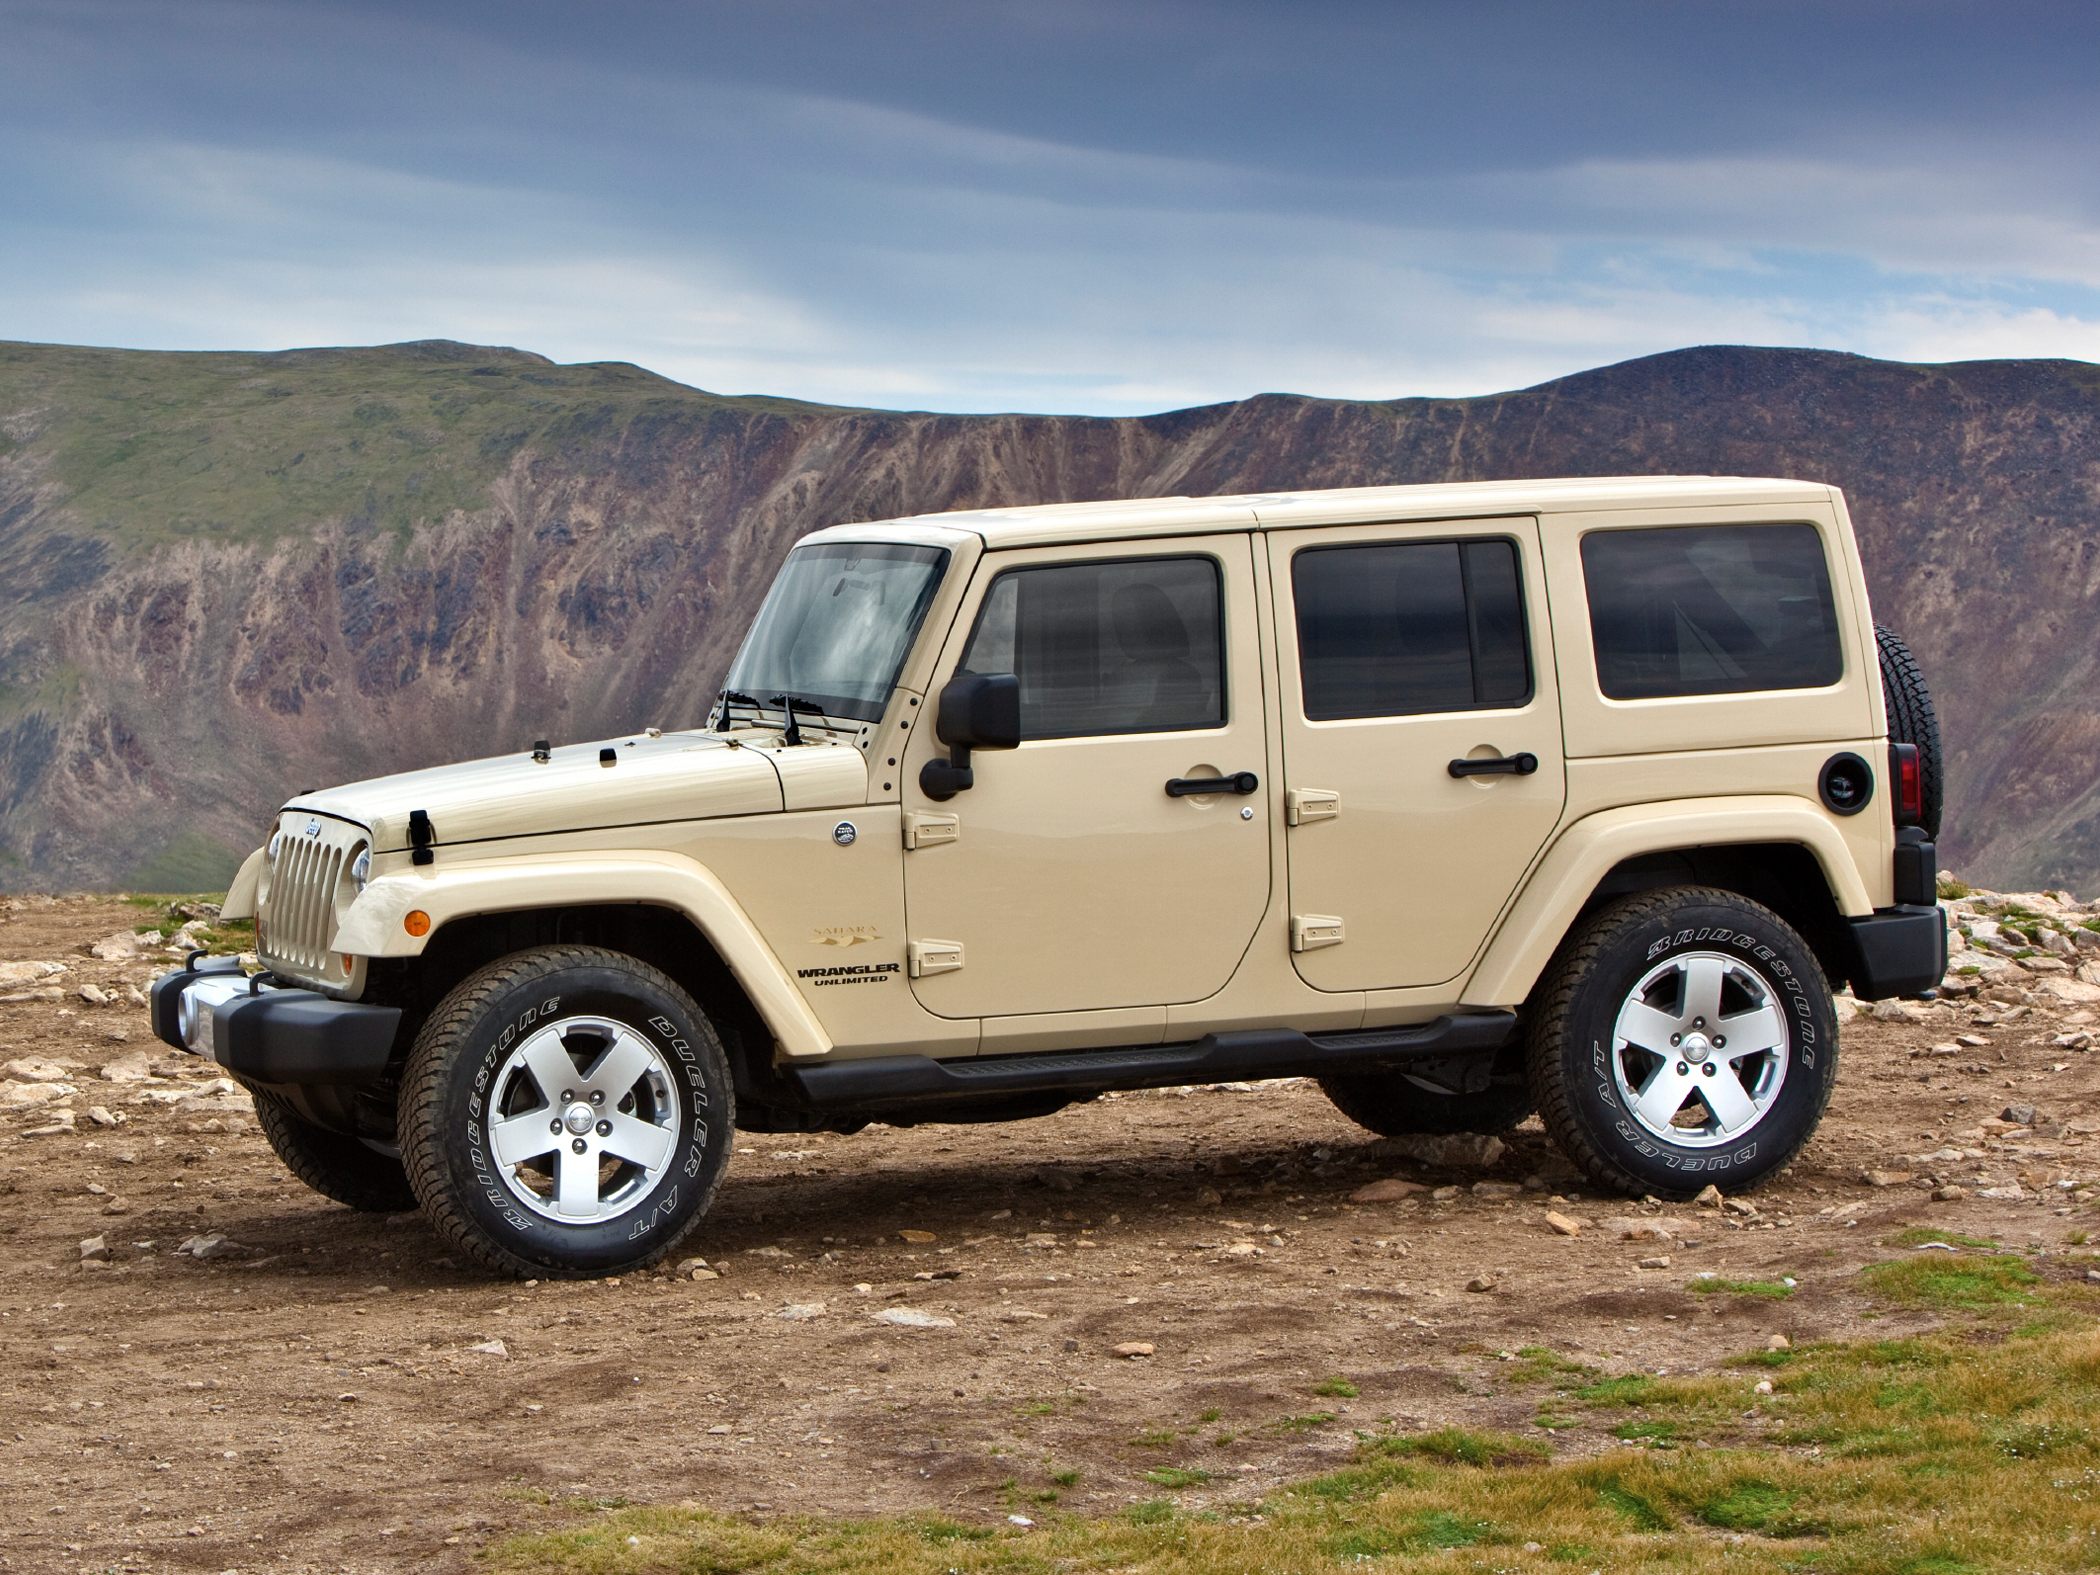 Buy hardtop for jeep wrangler unlimited #5